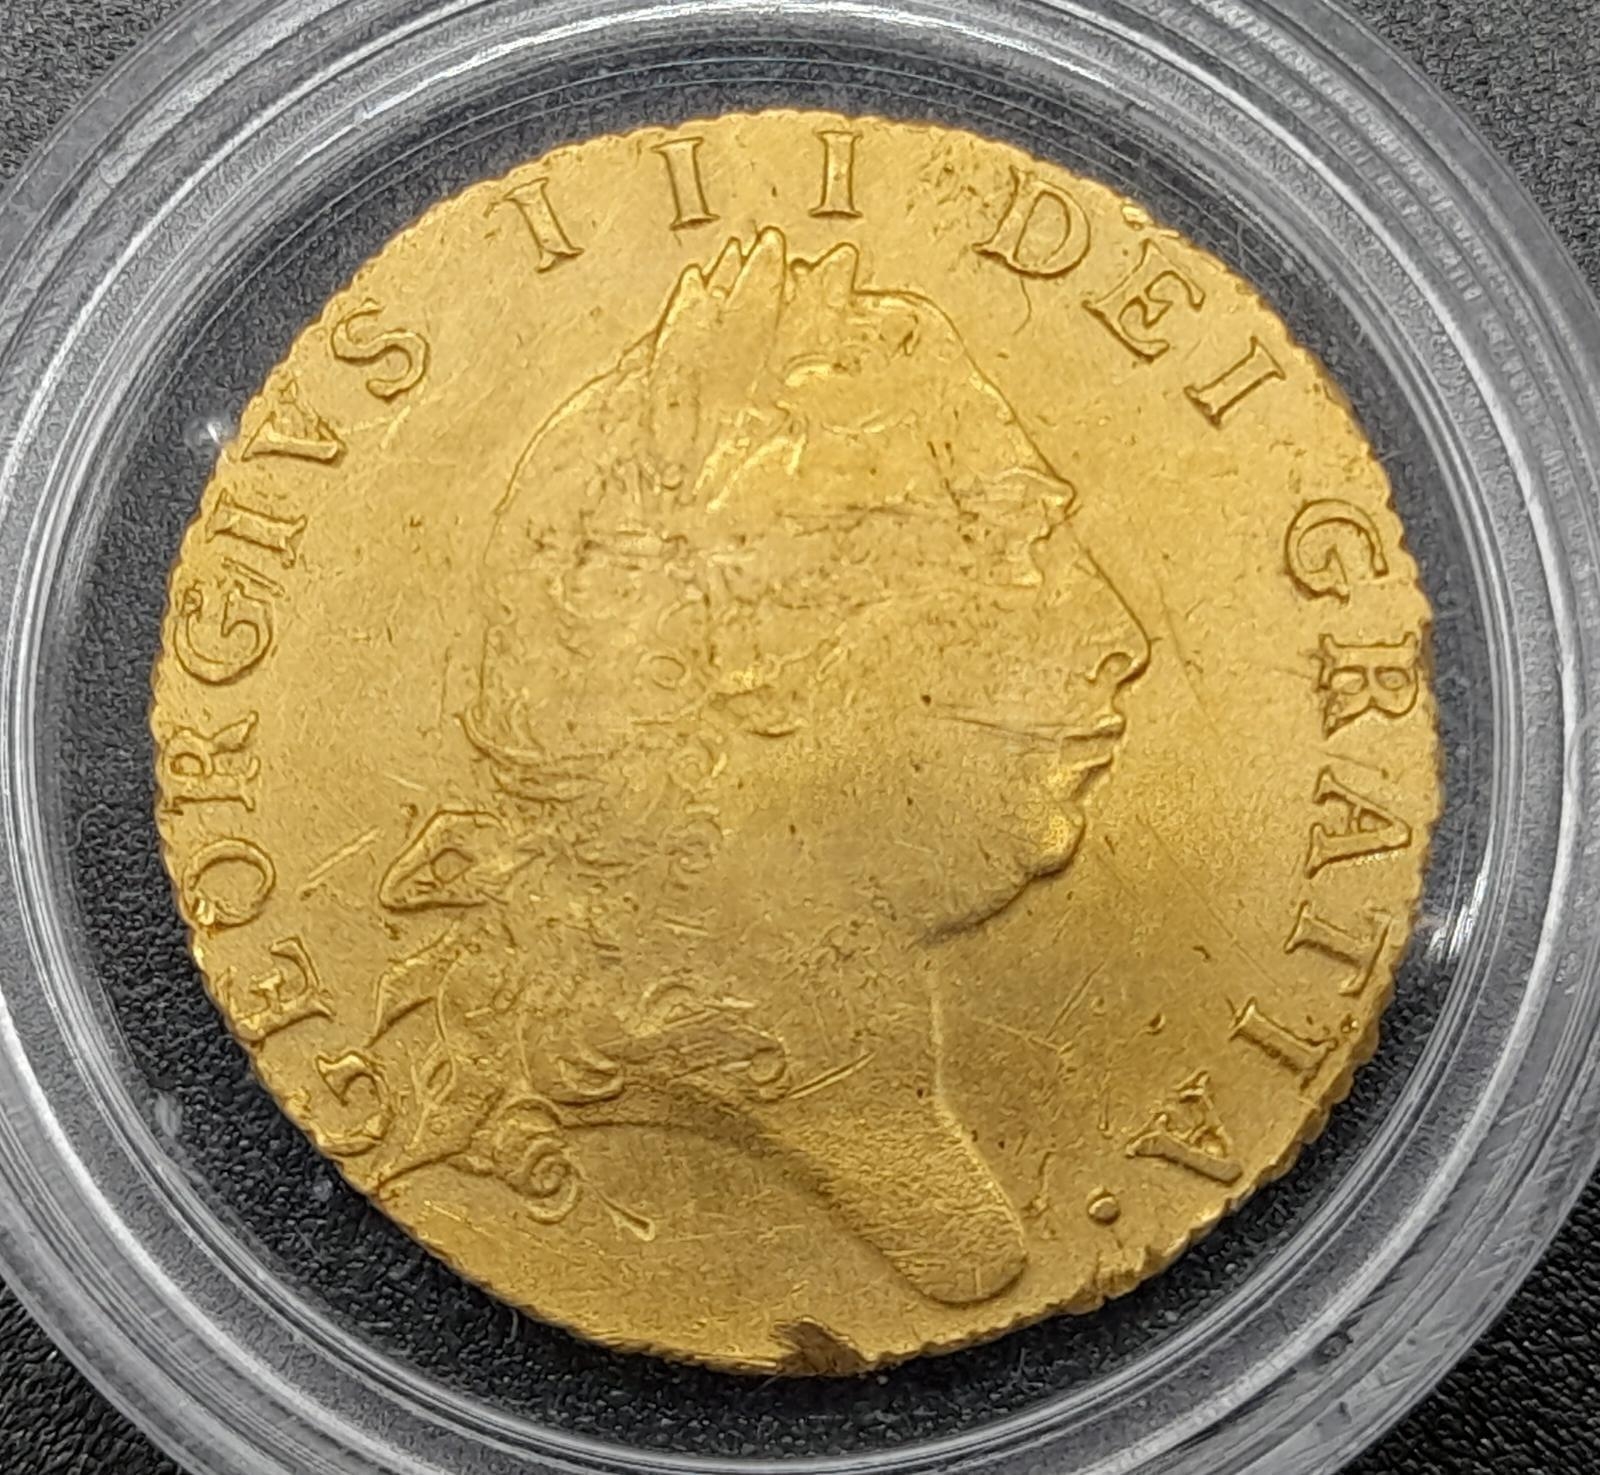 A 1779 George III Half Guinea 22K Gold Coin. VF condition but please see photos. 4.2g. - Image 2 of 4